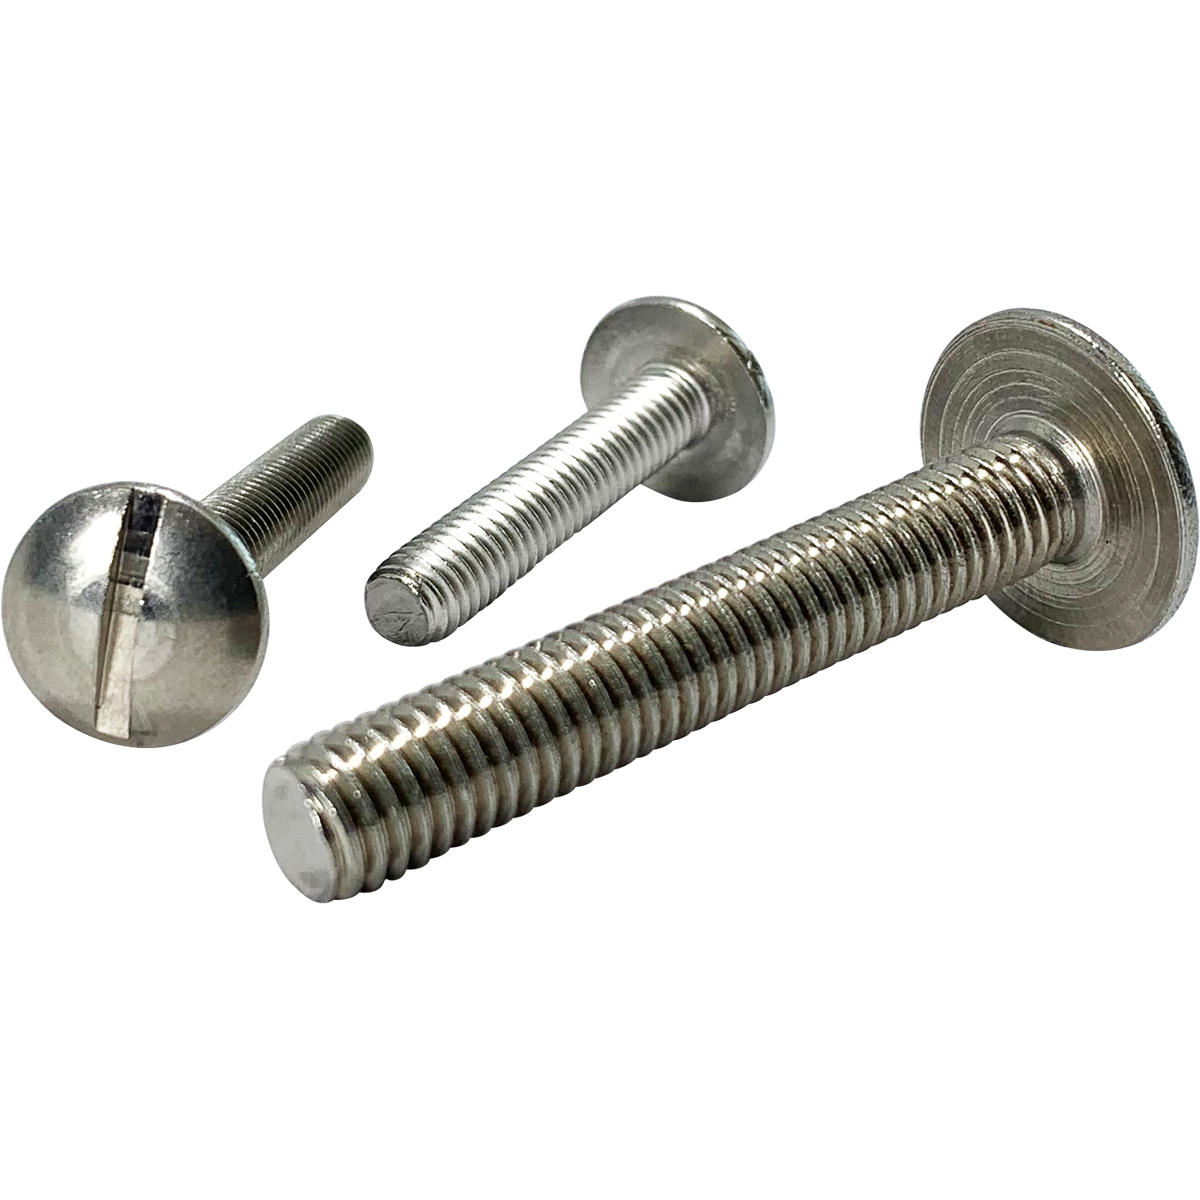 Mushroom head, slotted and cross slotted roofing bolts available in a variety of sizes.